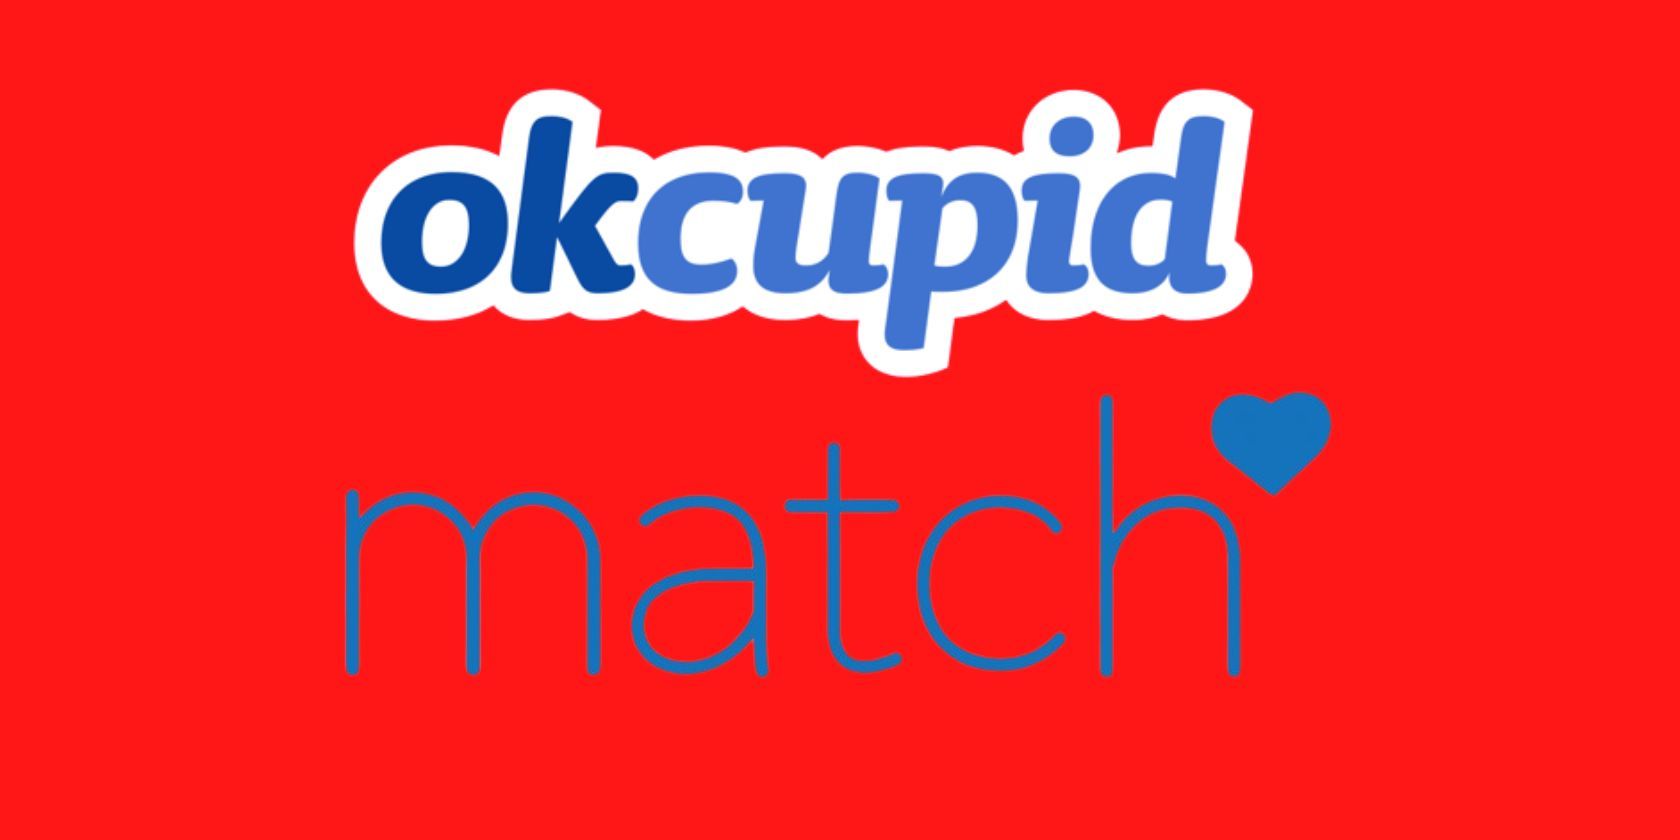 The OKCupid and Match logos on a red background